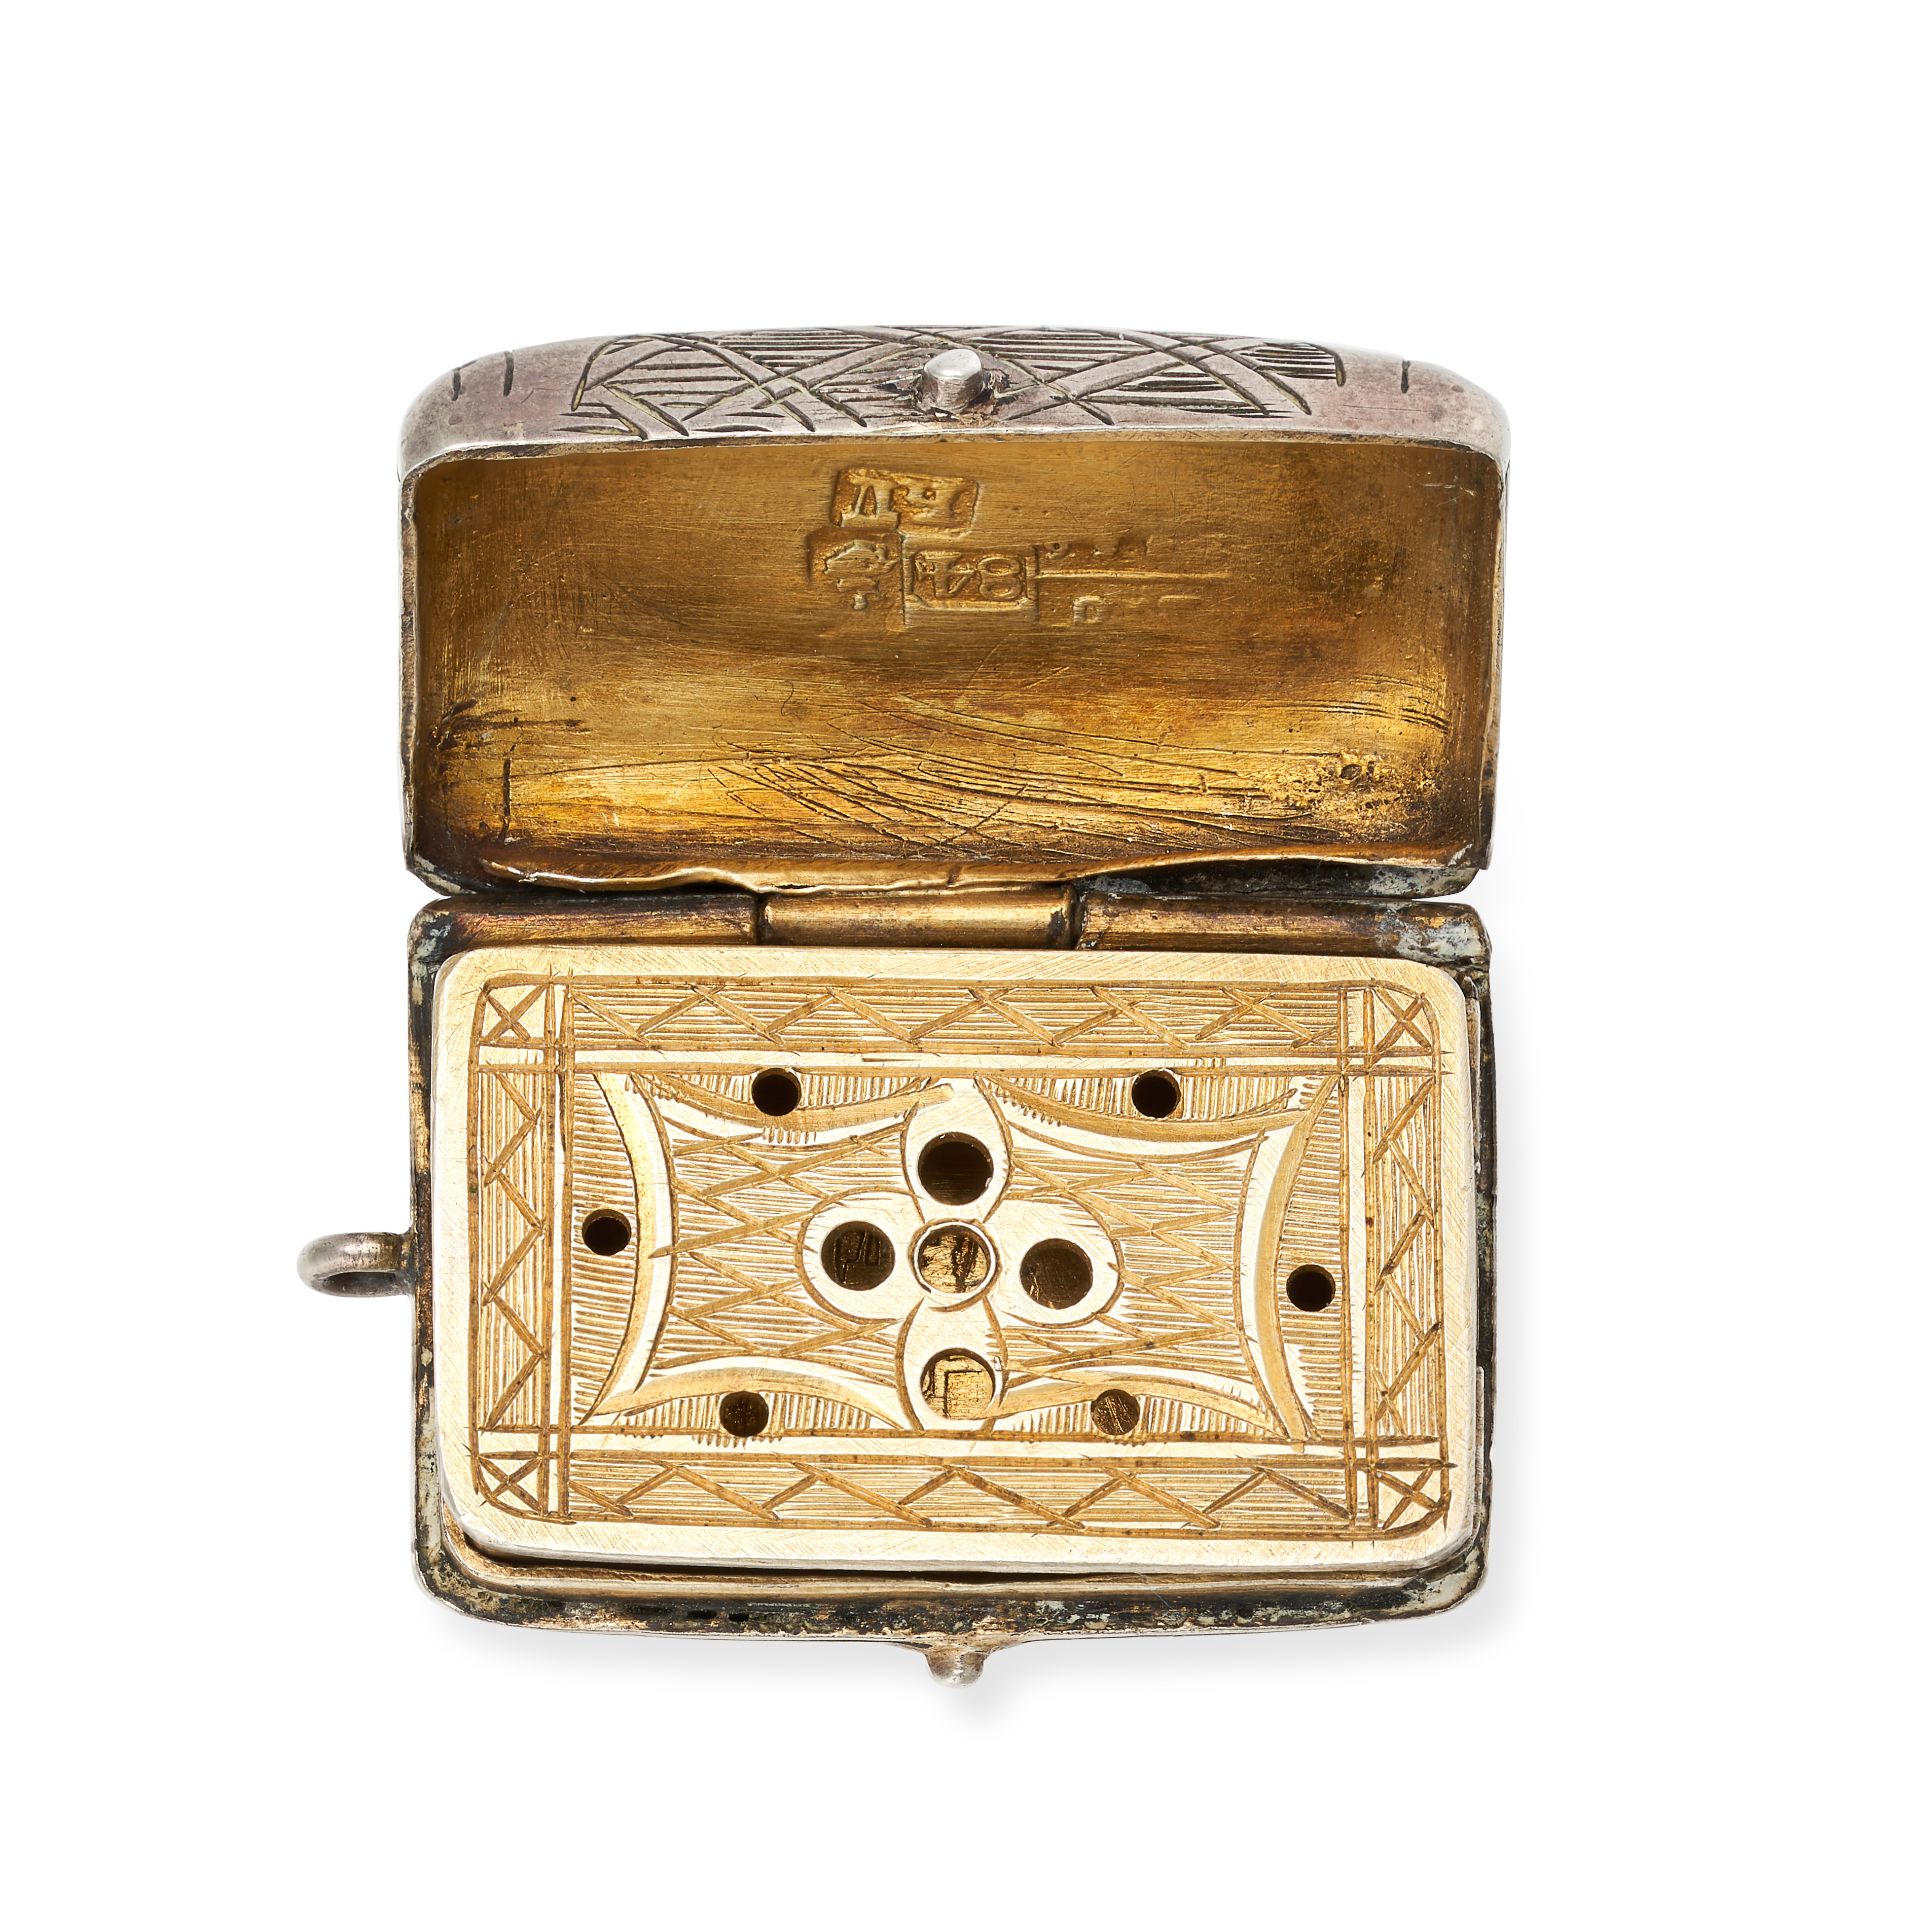 NO RESERVE - A RUSSIAN ANTIQUE SILVER VINAIGRETTE in silver gilt, the rounded rectangular body wi... - Image 2 of 2